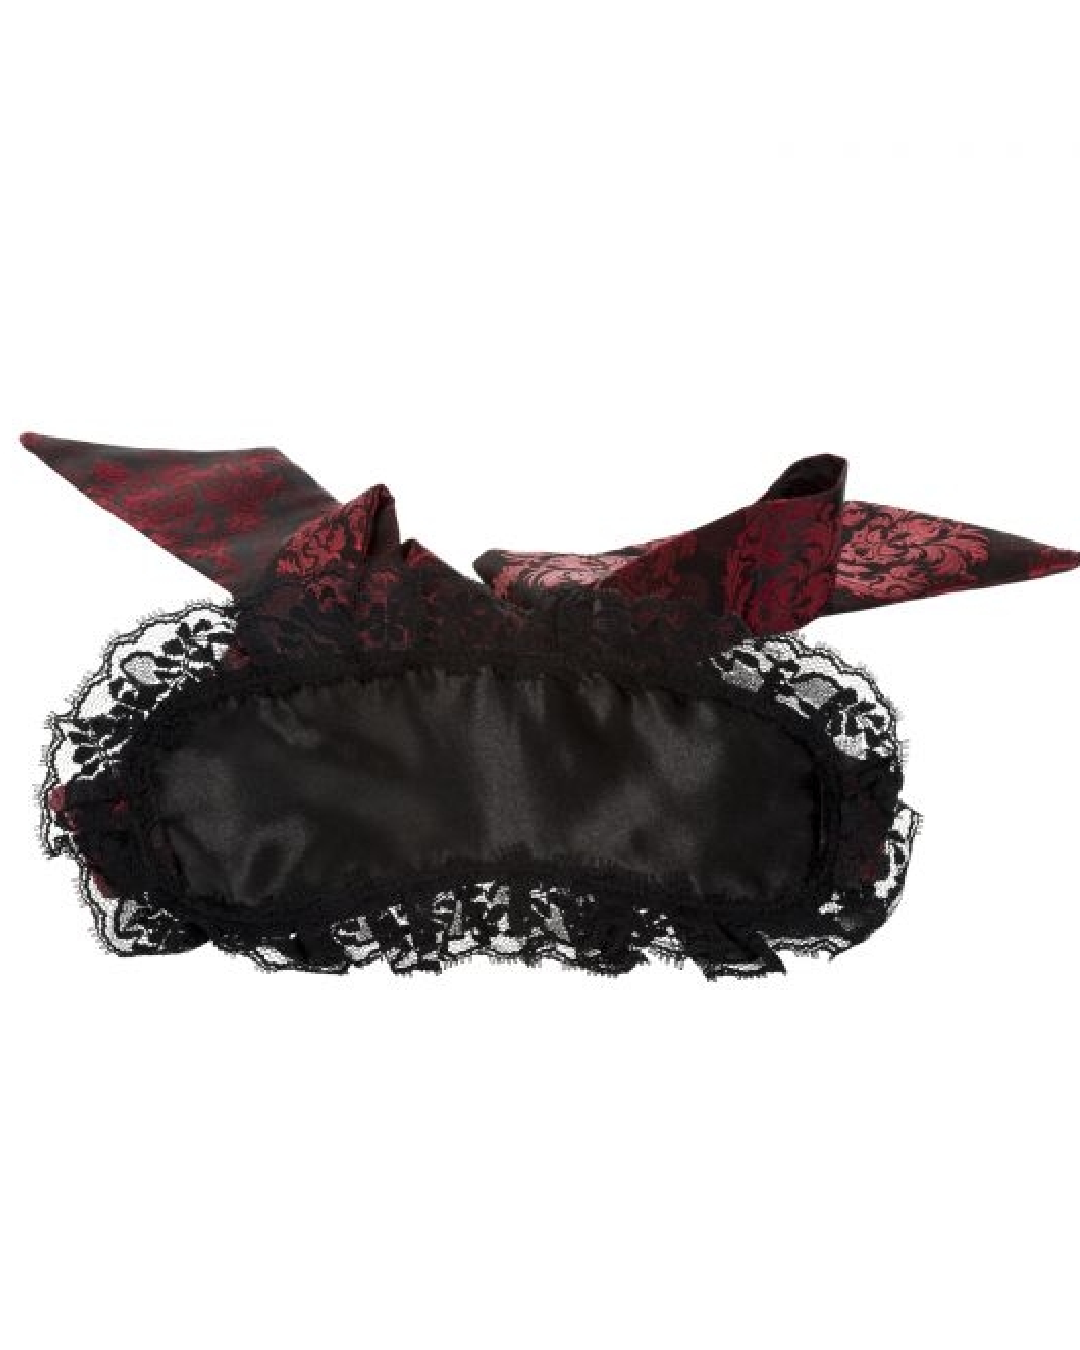 Scandal Blackout Lace Blindfold mask with bow tied on white background 